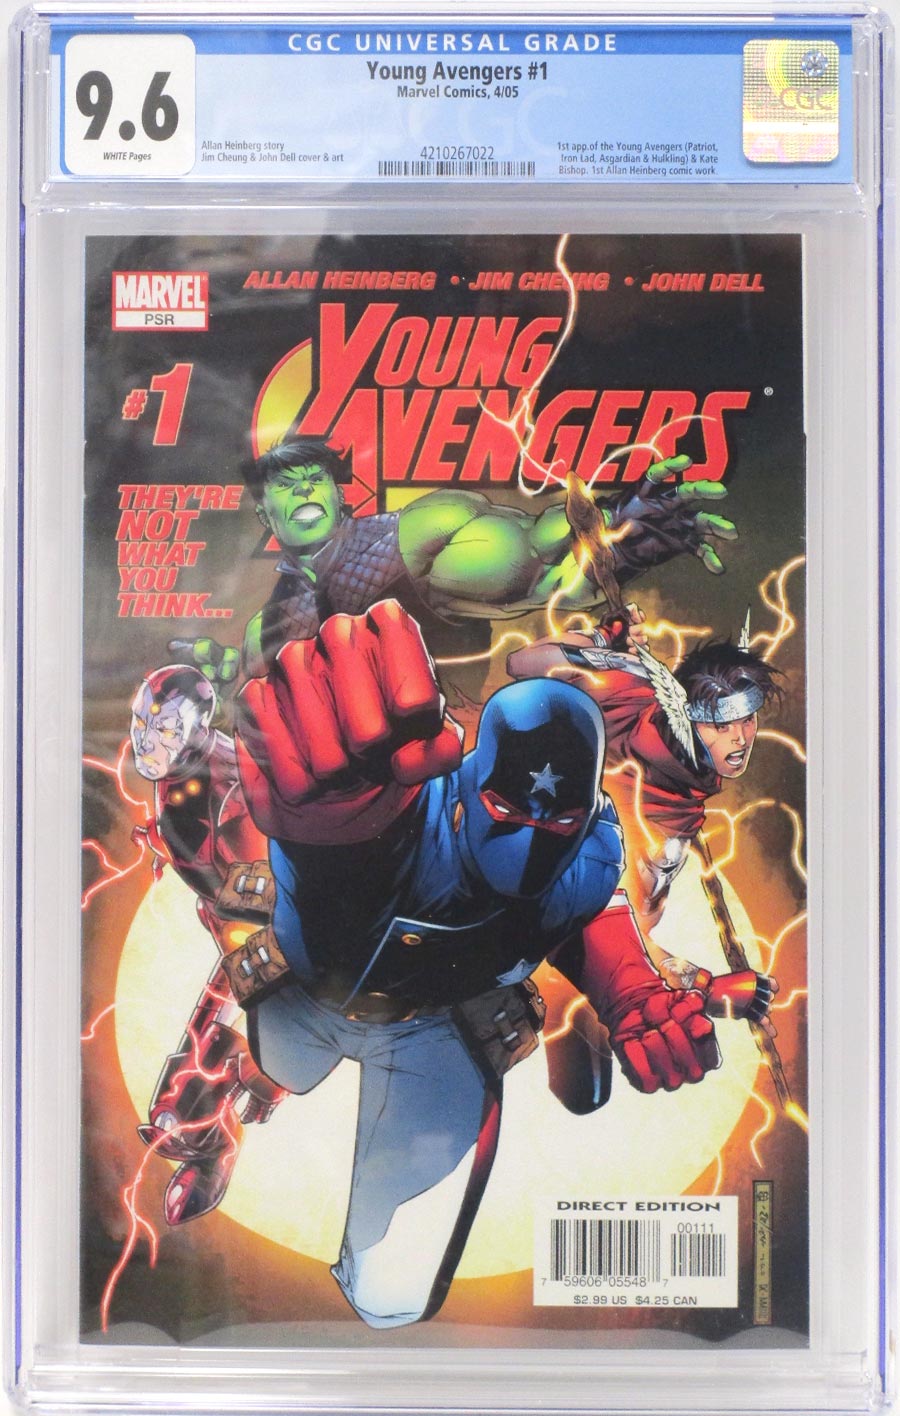 Young Avengers #1 Cover F CGC 9.6